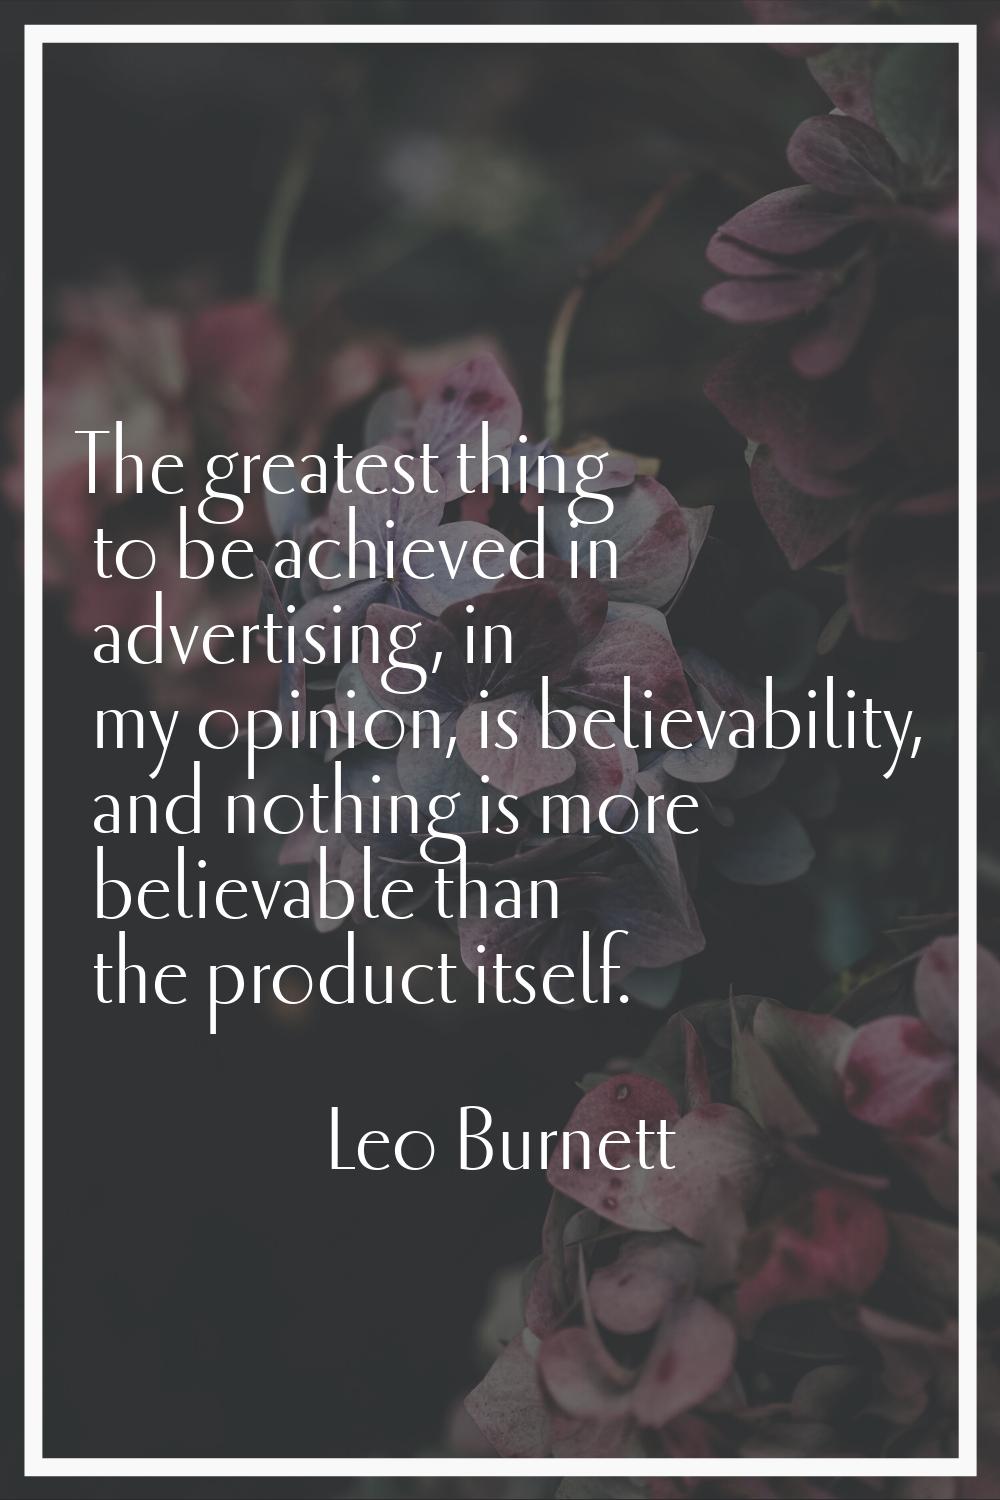 The greatest thing to be achieved in advertising, in my opinion, is believability, and nothing is m